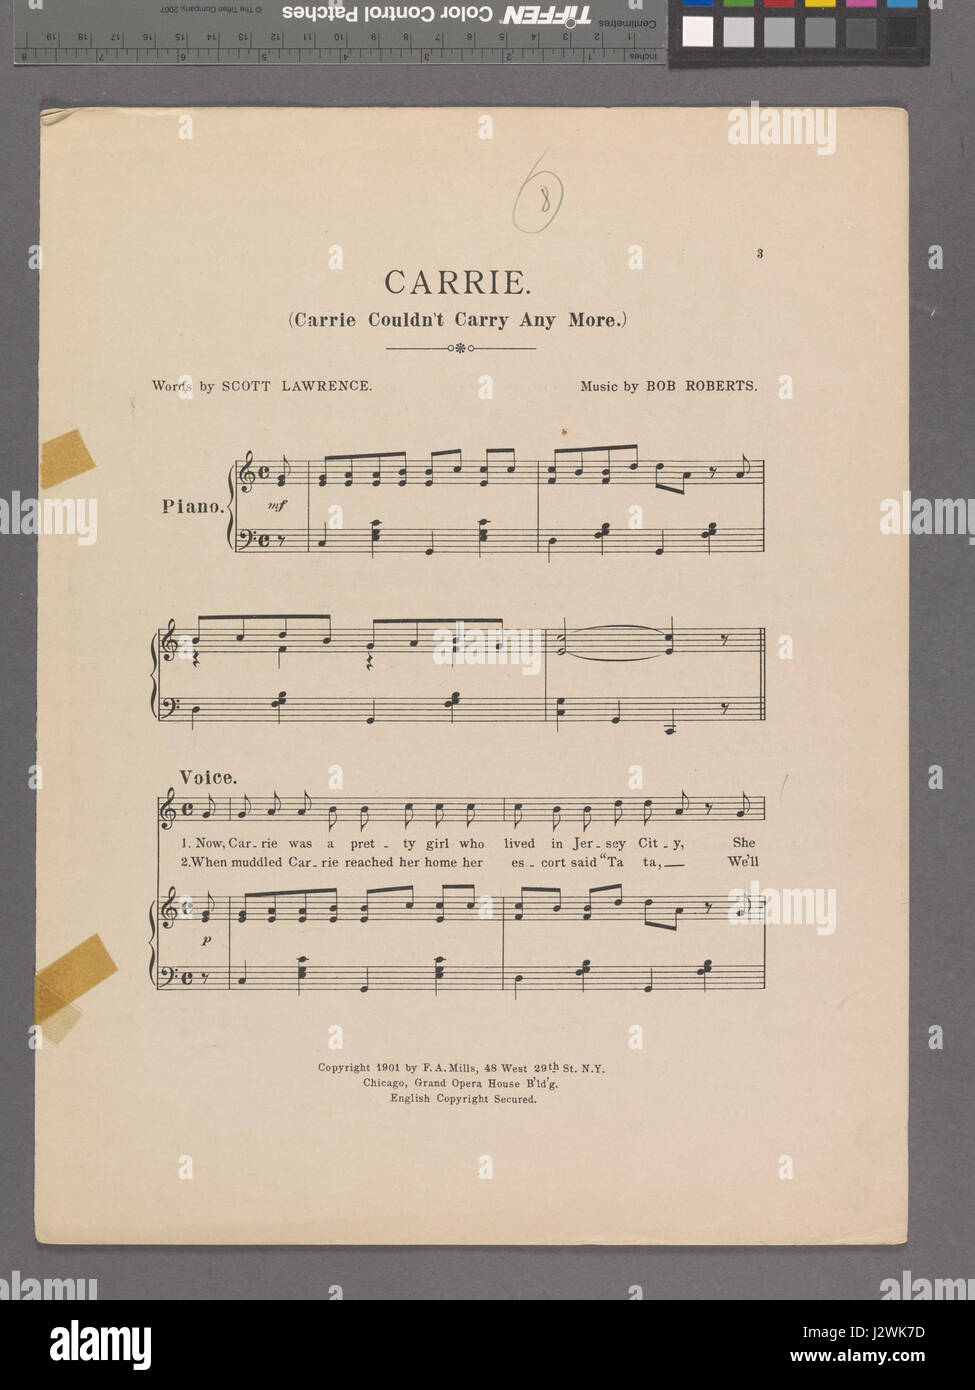 Carrie (Carrie couldn't carry any more) (NYPL Hades-1925785-1953316) Stock Photo